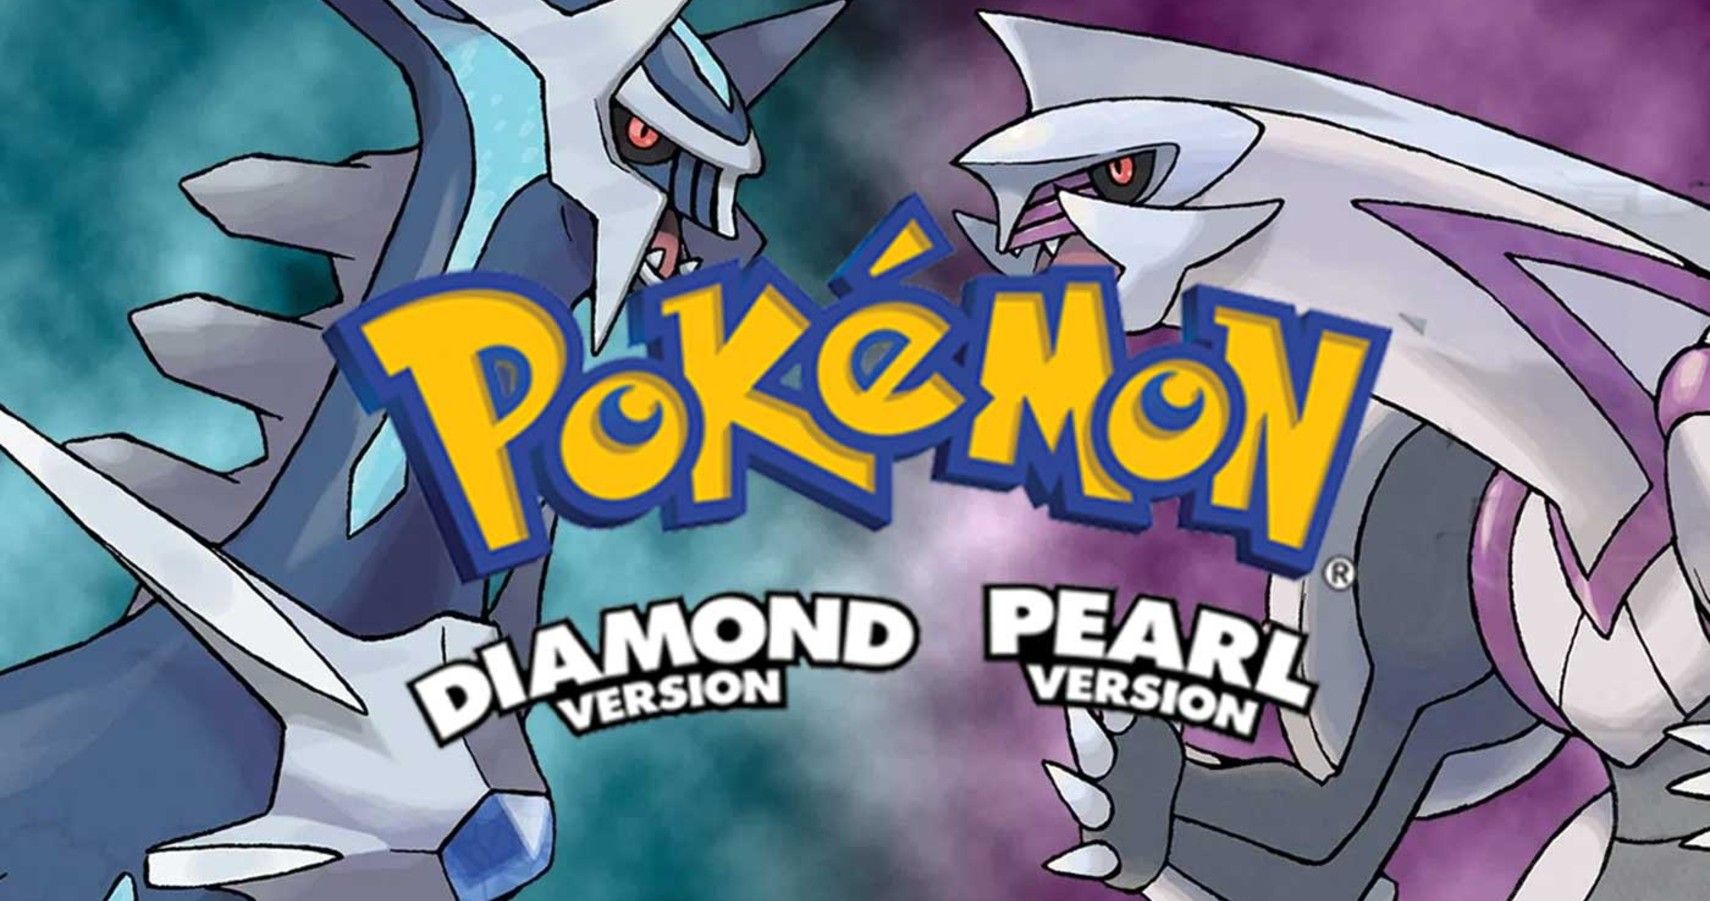 New URL Fuels Rumors Pokemon Diamond And Pearl Remakes Are Coming Soon